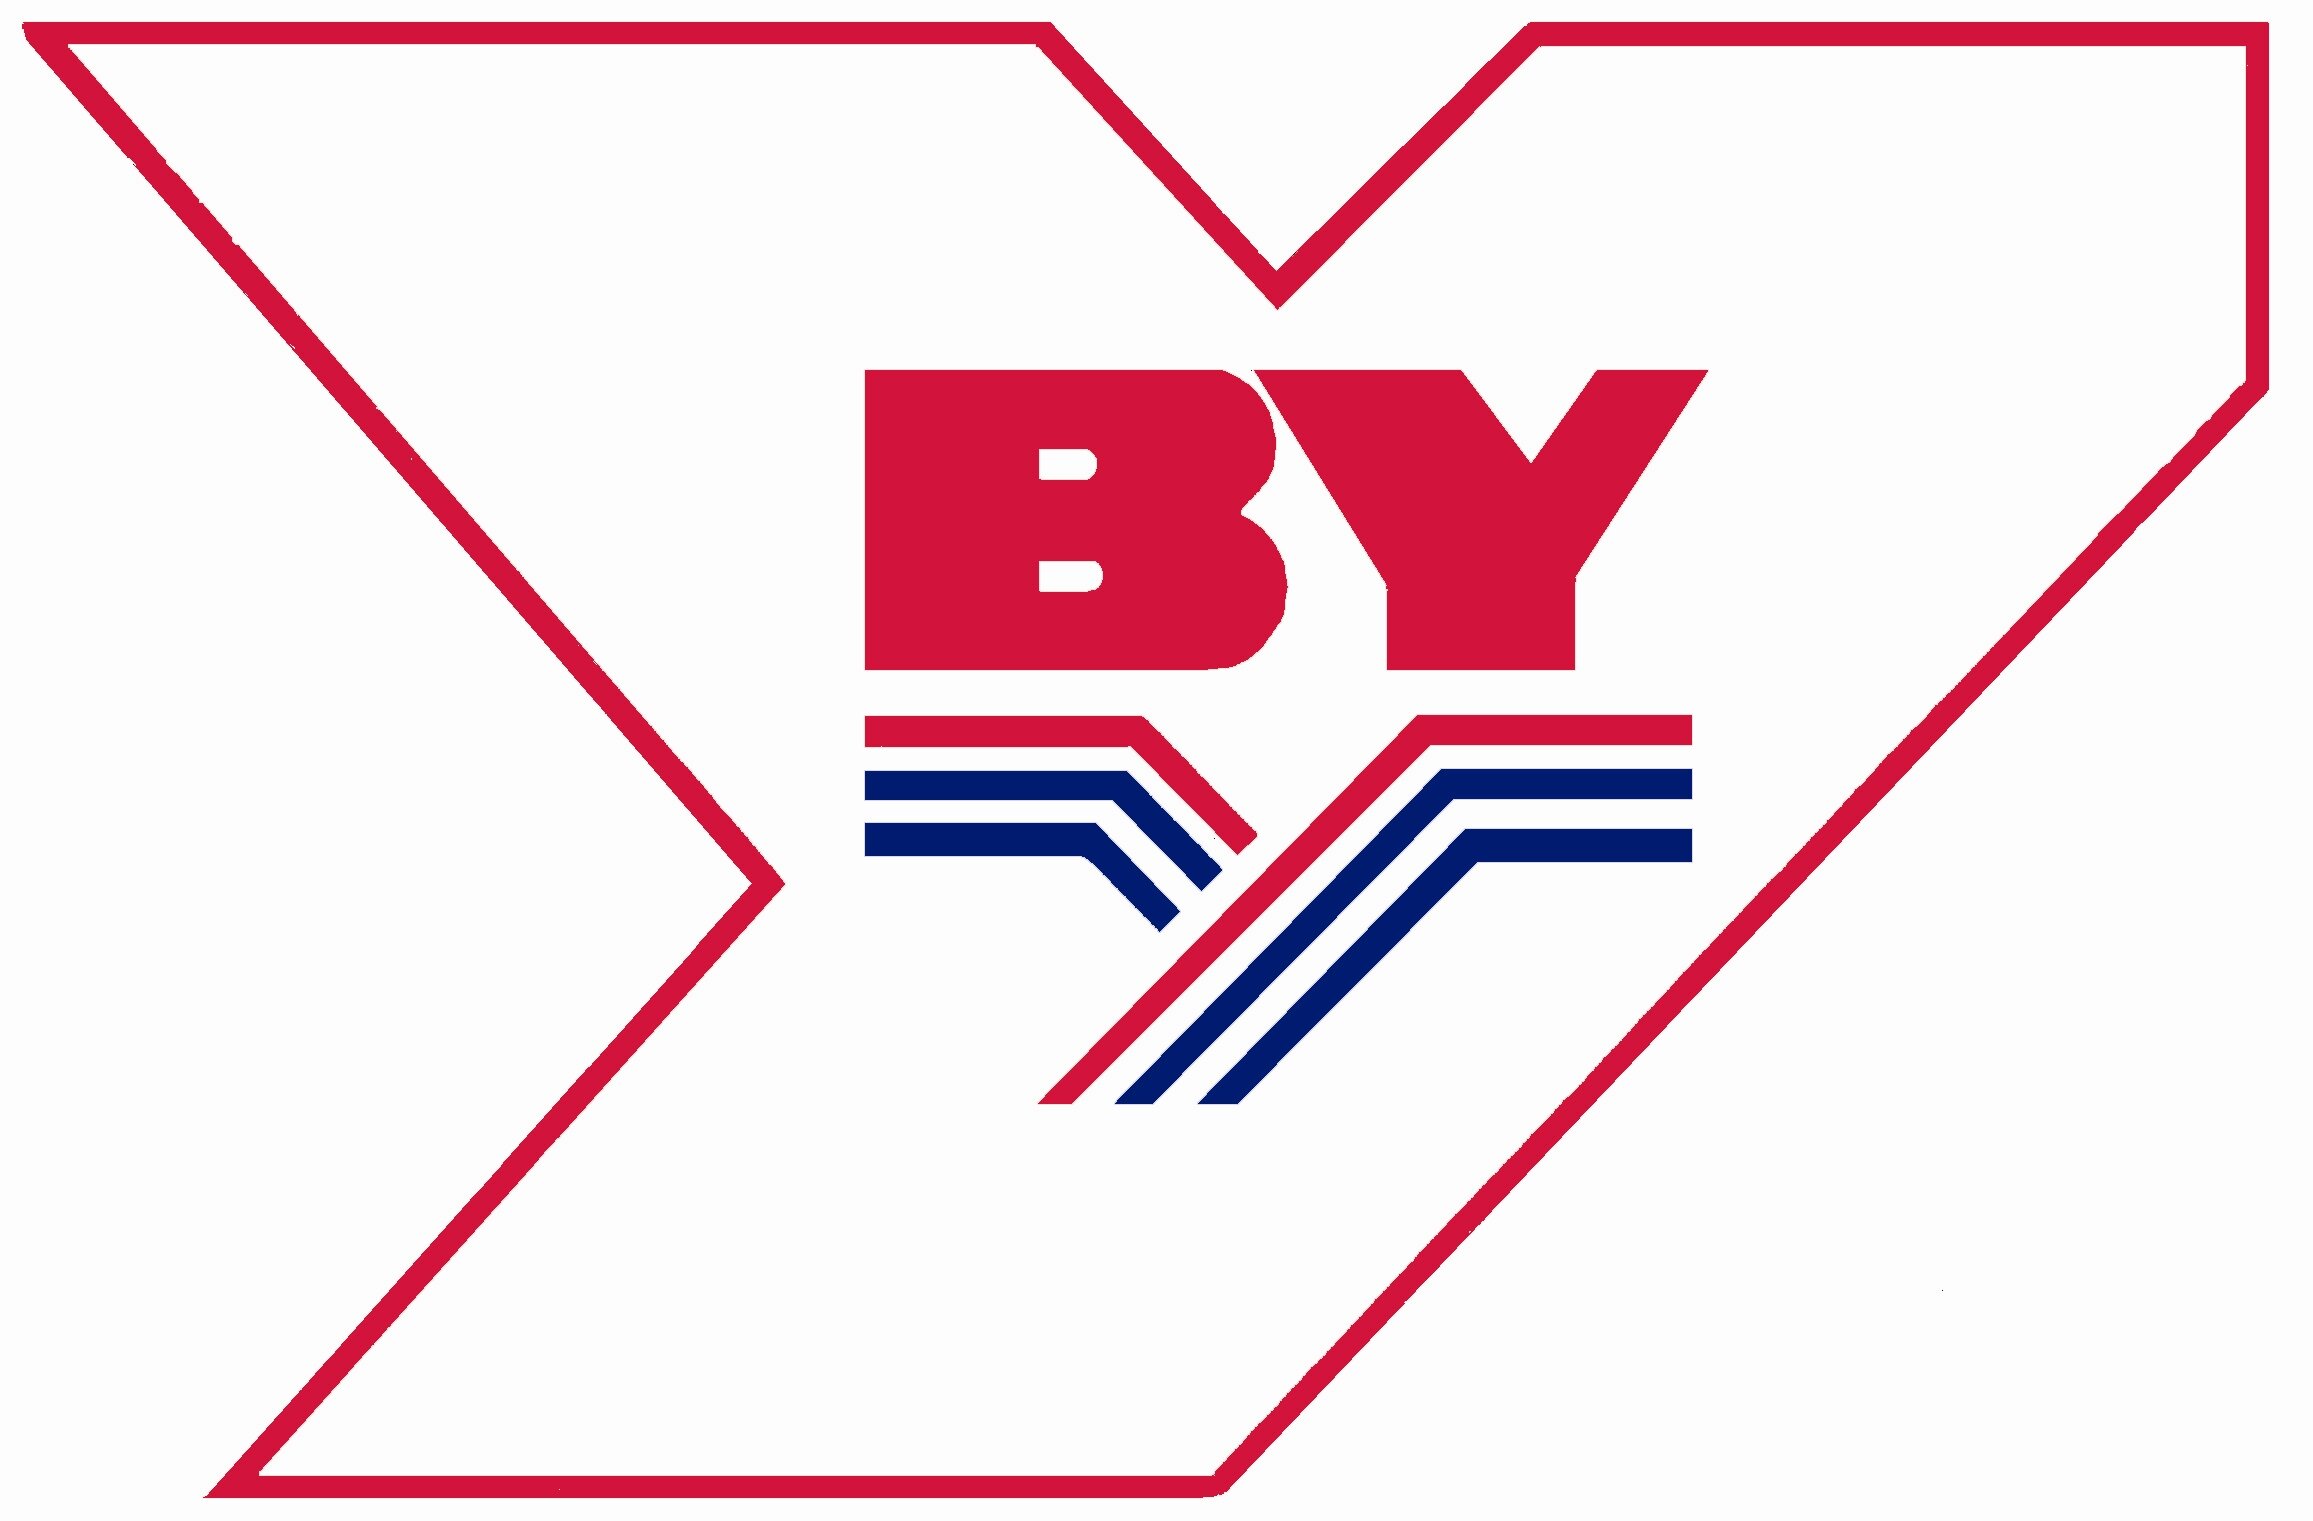 please follow @bycl1975 for up to date company information